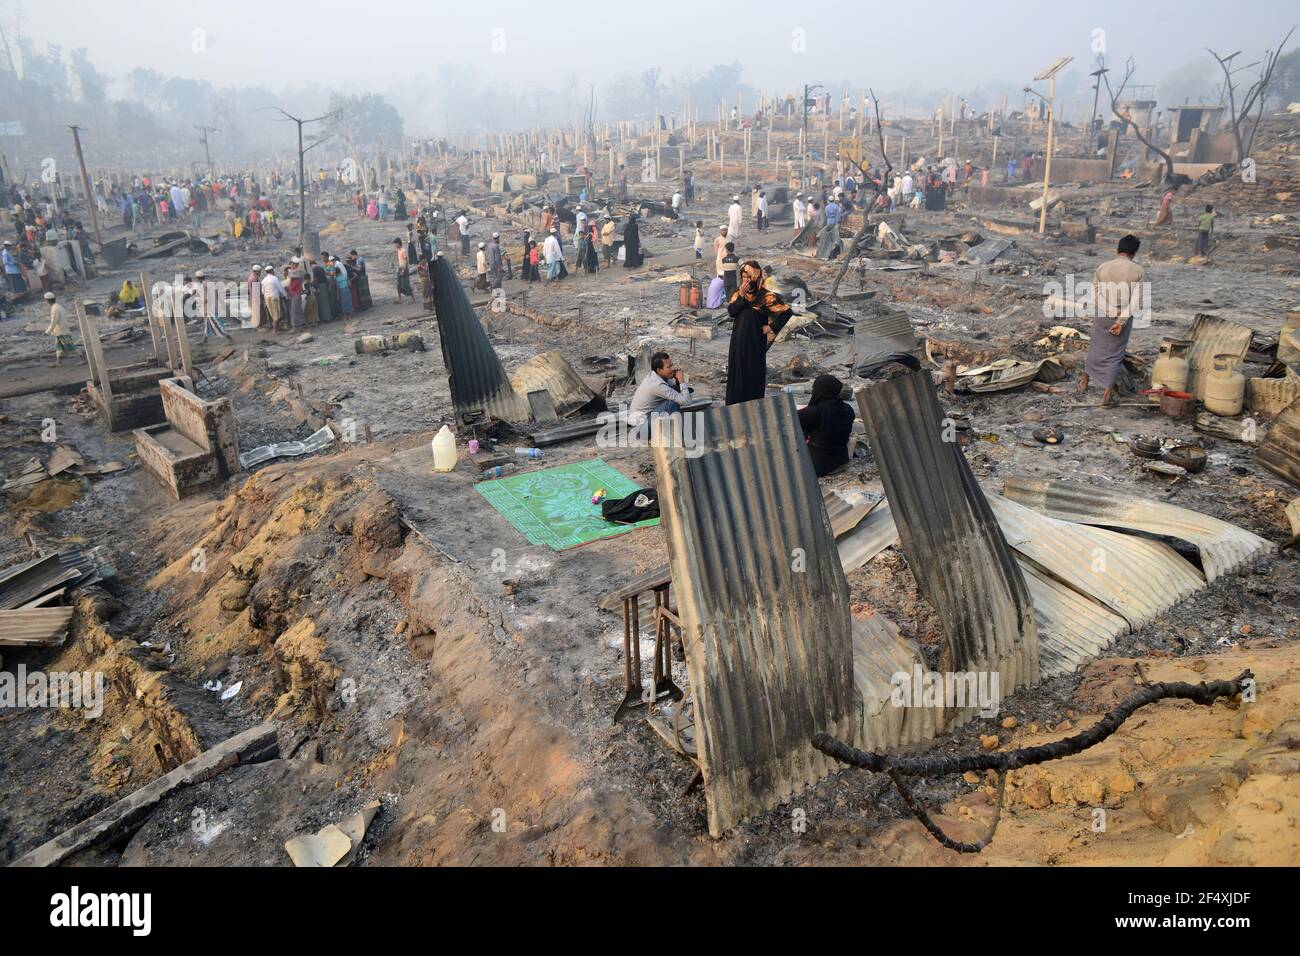 Cox's Bazar, Bangladesh. 23rd Mar, 2021. Massive fire destroys around 10000 homes and 15 killed on Monday March 22 in Rohingya refugee camp at Cox'x Bazar, Bangladesh.Credit: Md Zakirul Mazed/Alamy live News Stock Photo